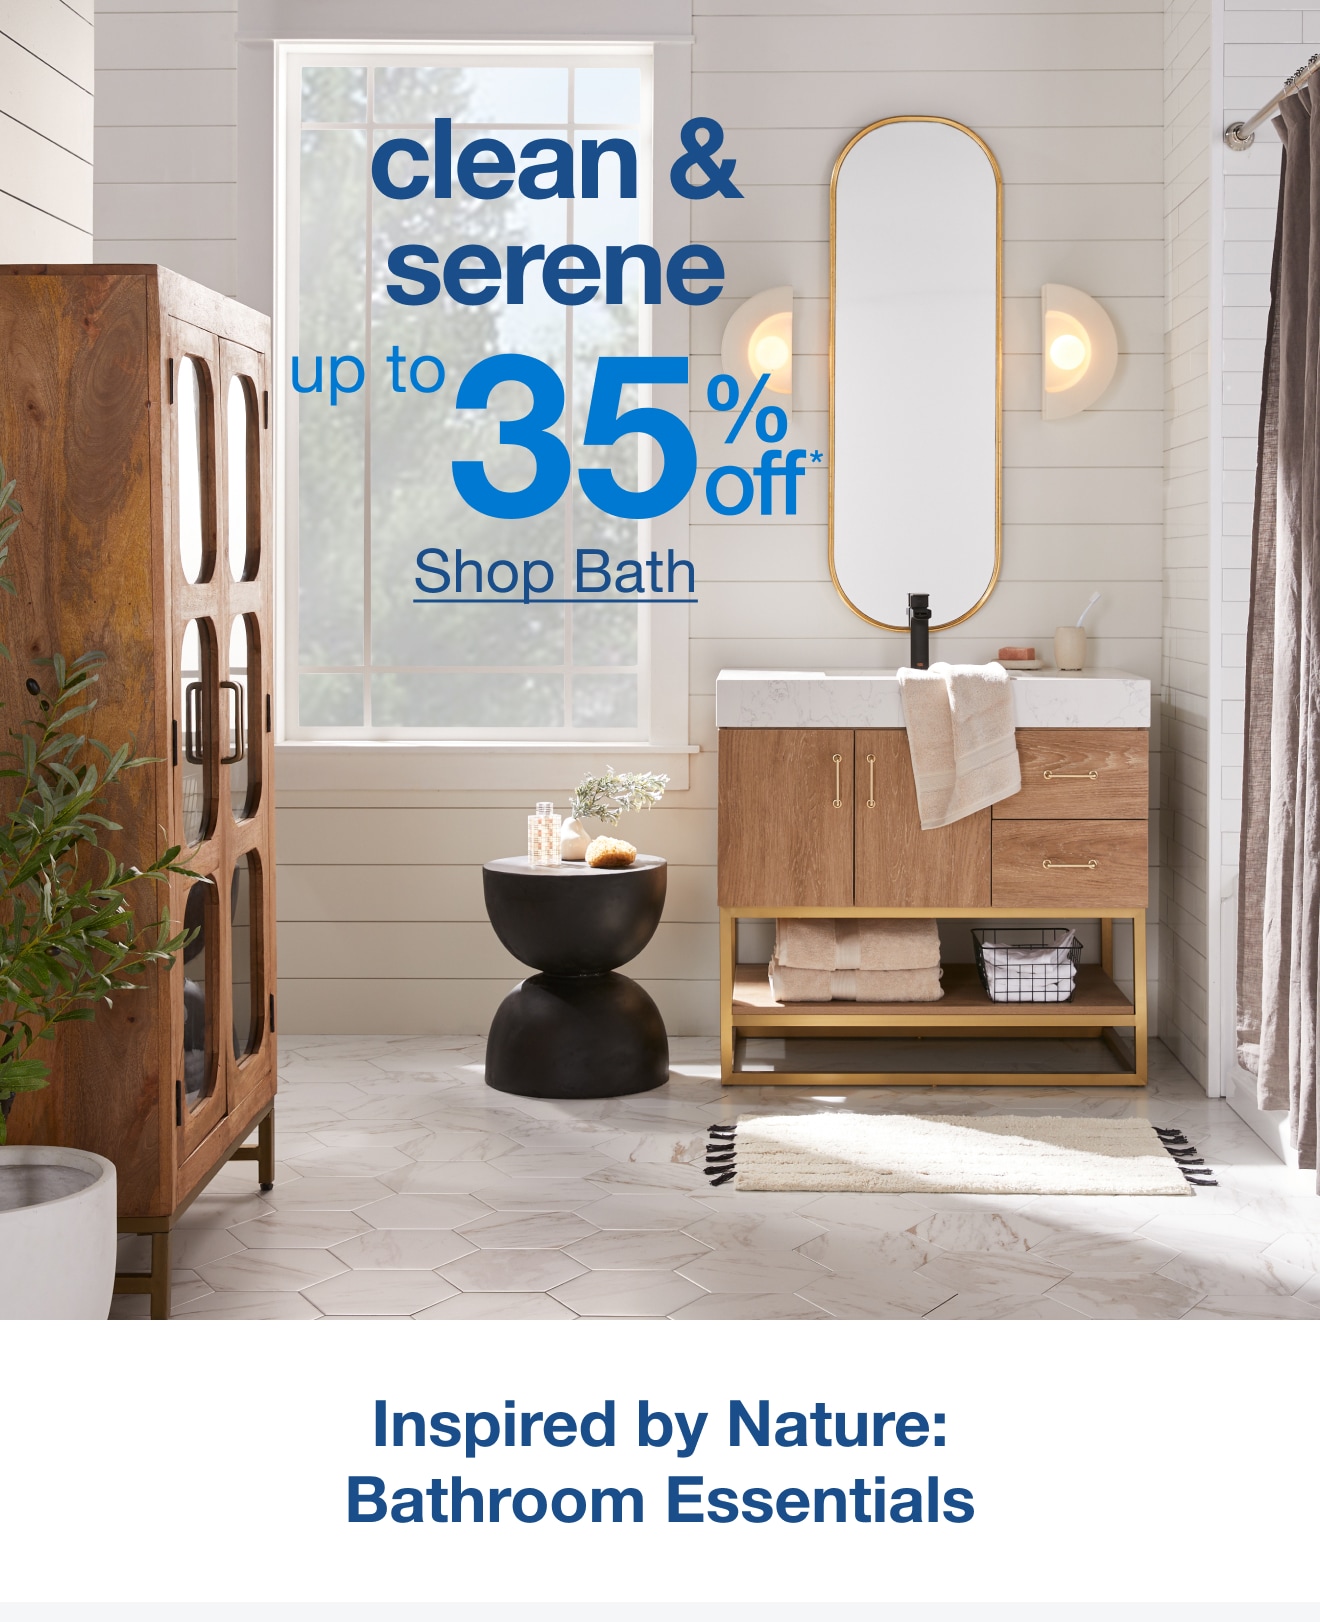 Up to 35% Off Bath - Shop Now!